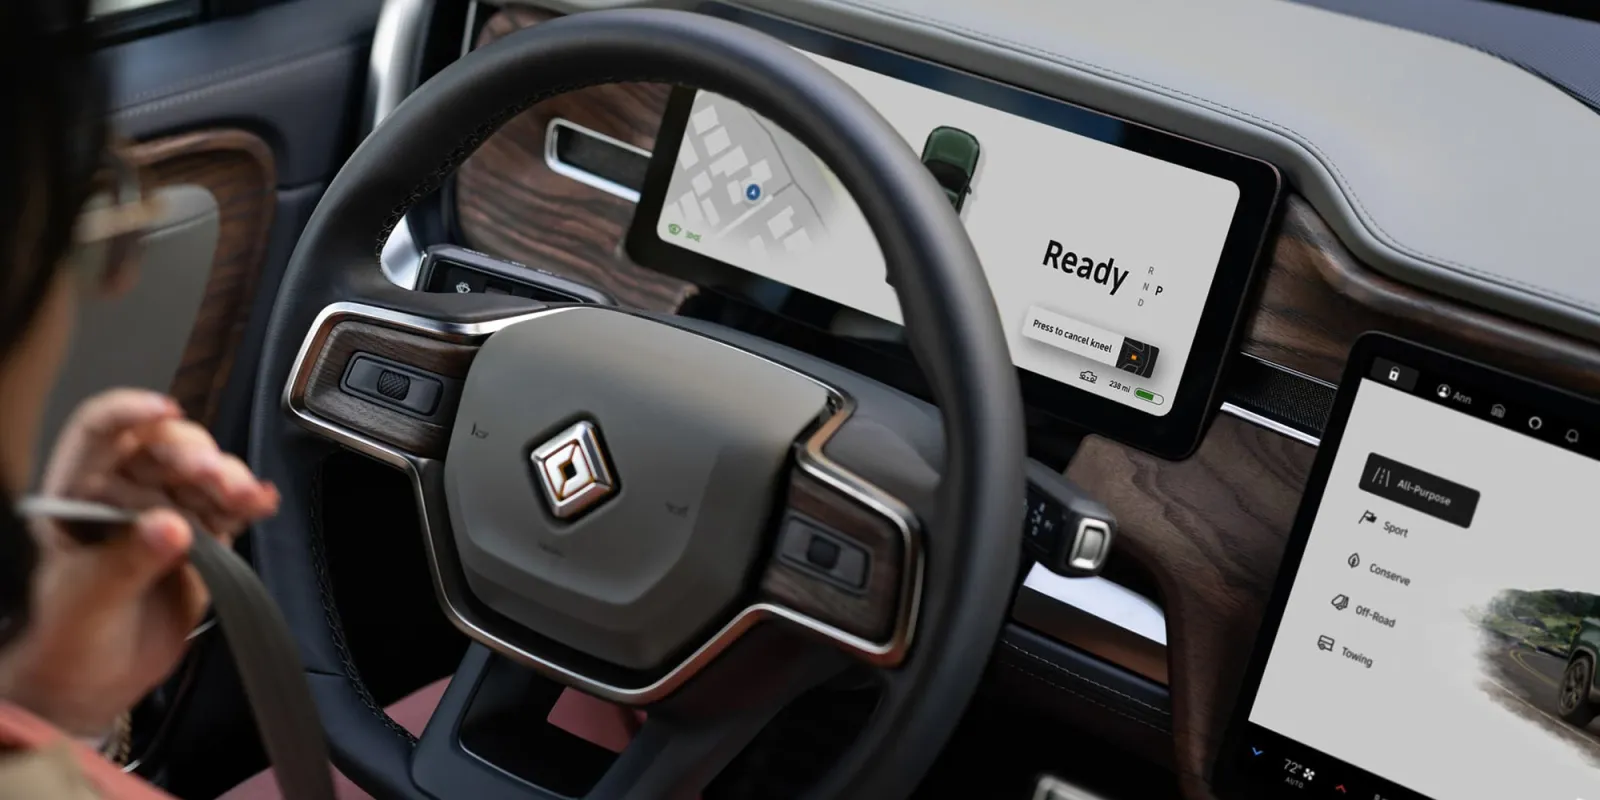 Android Automotive Serves as Core Operating System for Rivian